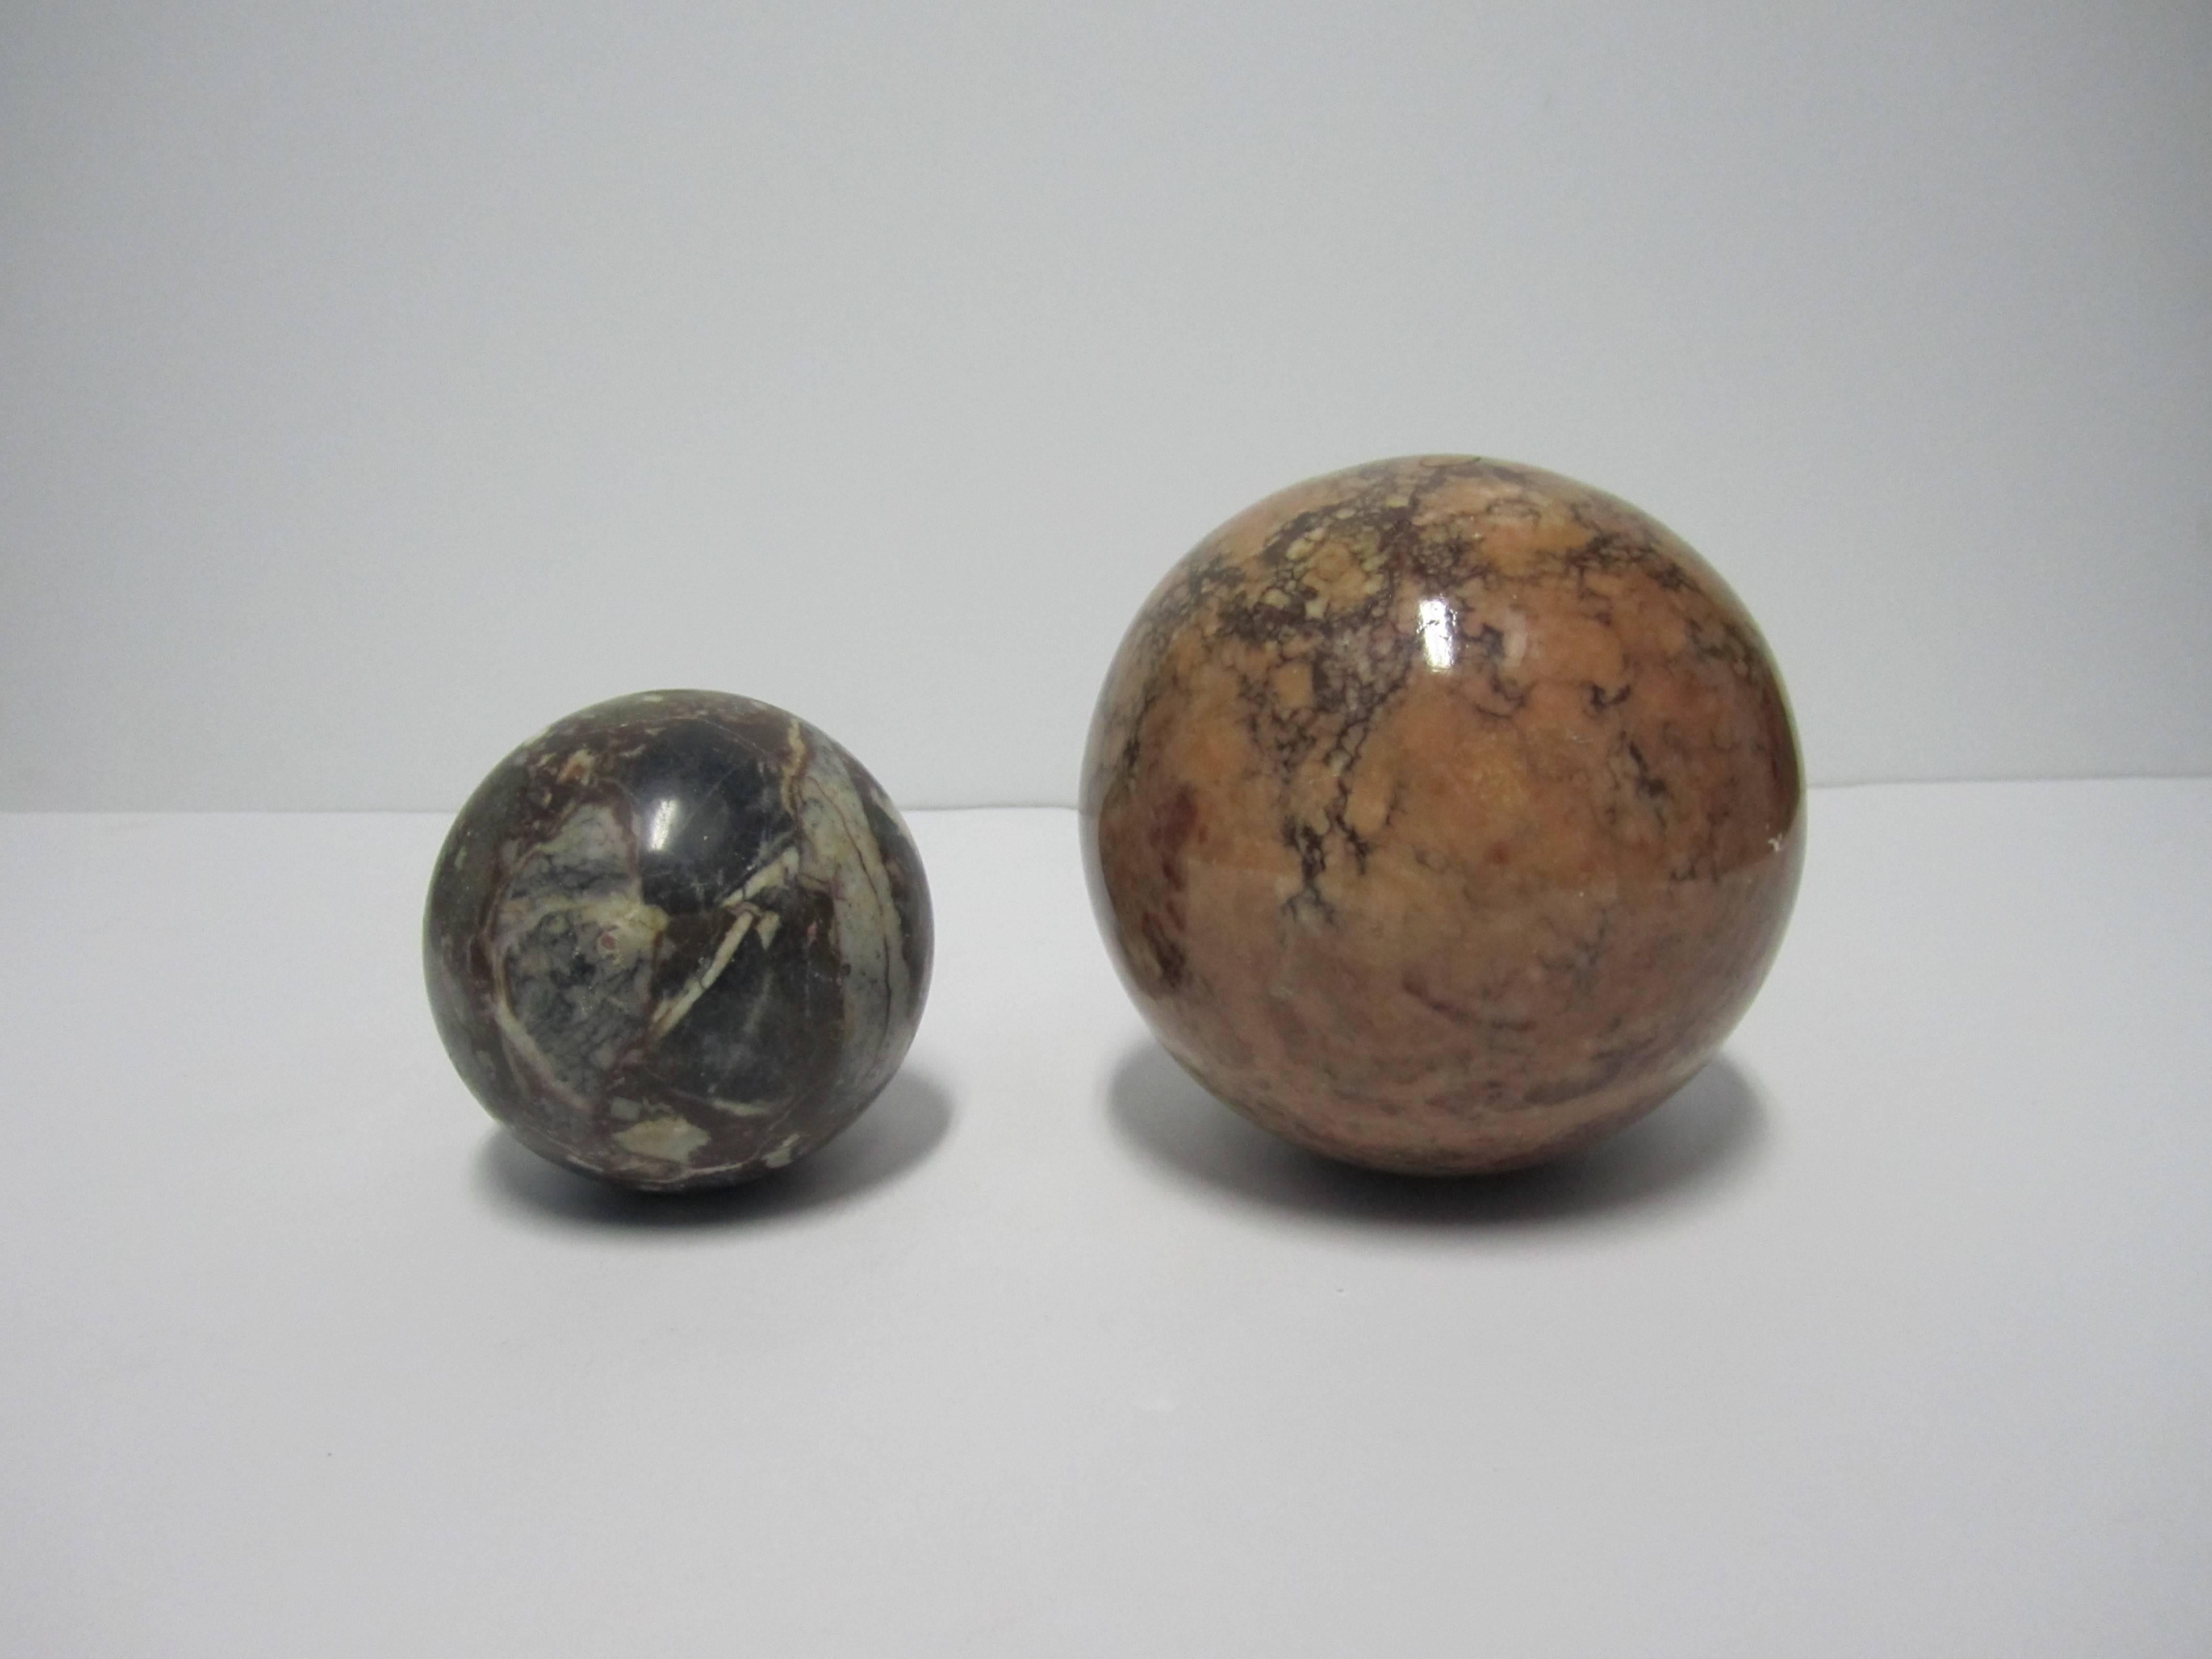 A vintage pair of Modern marble spheres, circa 1970s. Colors include blue, green, white, salmon pink, cream, and dark red. Measurements: 4 inch diameter and 6 inch diameter. Pair available here online. By request, pair can be made available by